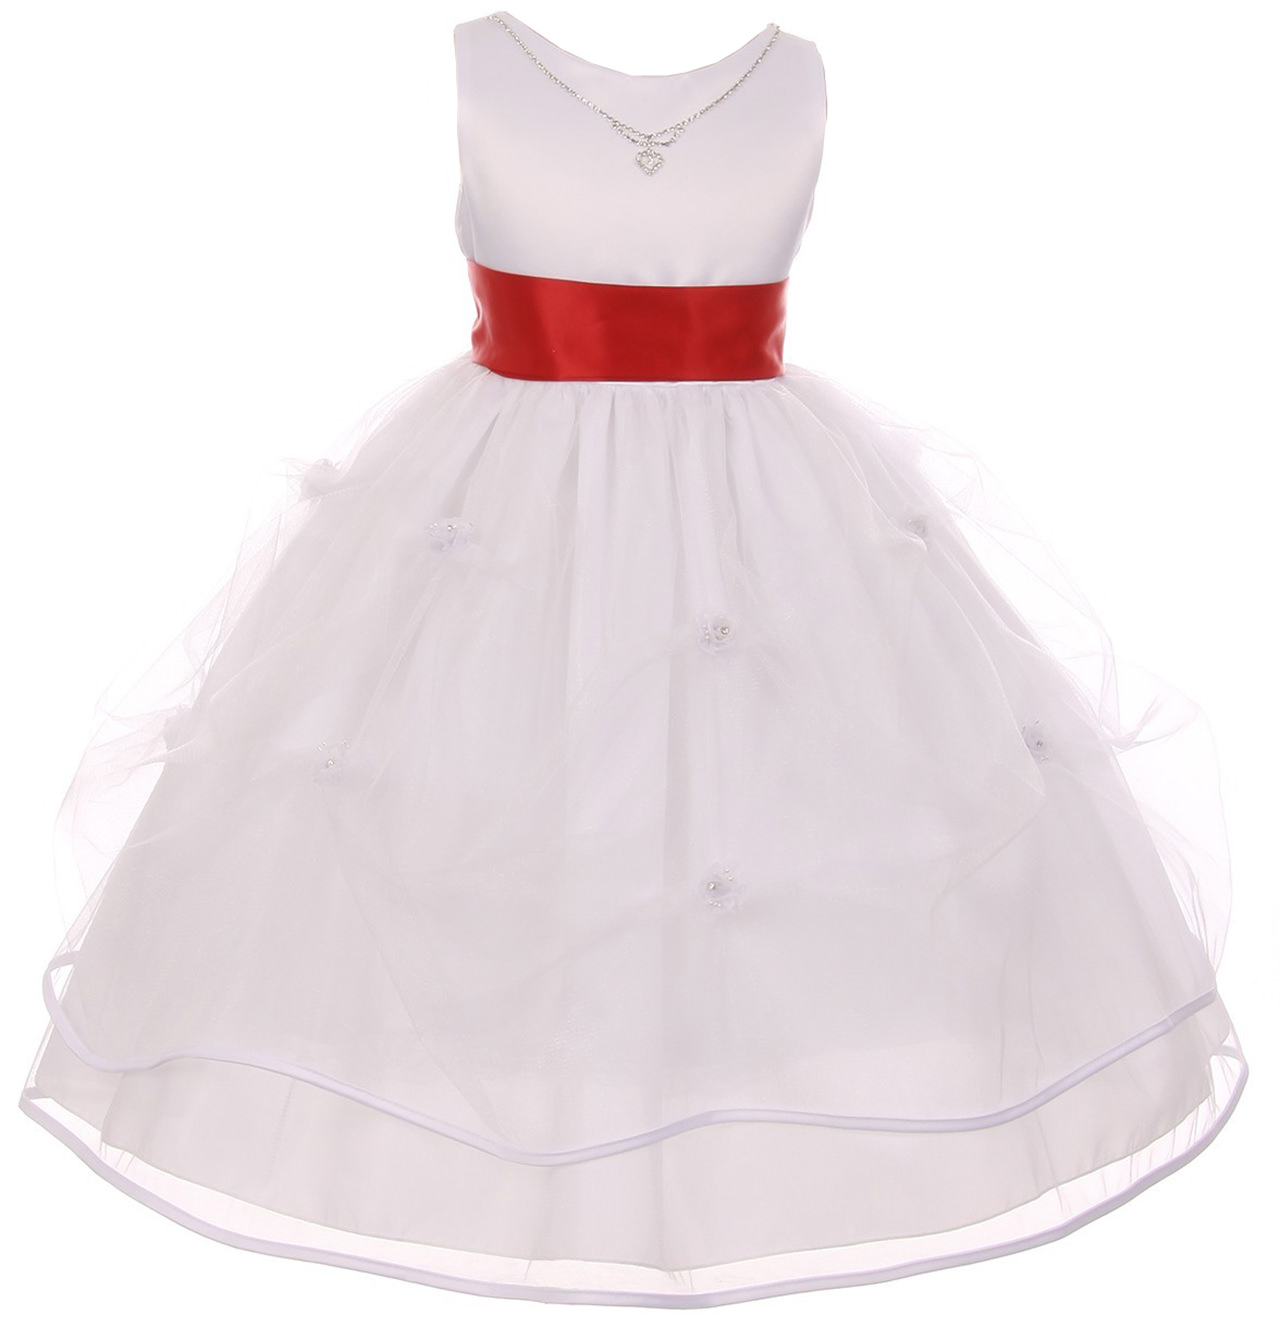 Big Girls' Sleeveless Crystal Necklace Tulle Pageant Communion Flower Girl Dress Red 12 (C01B16W) - image 1 of 3